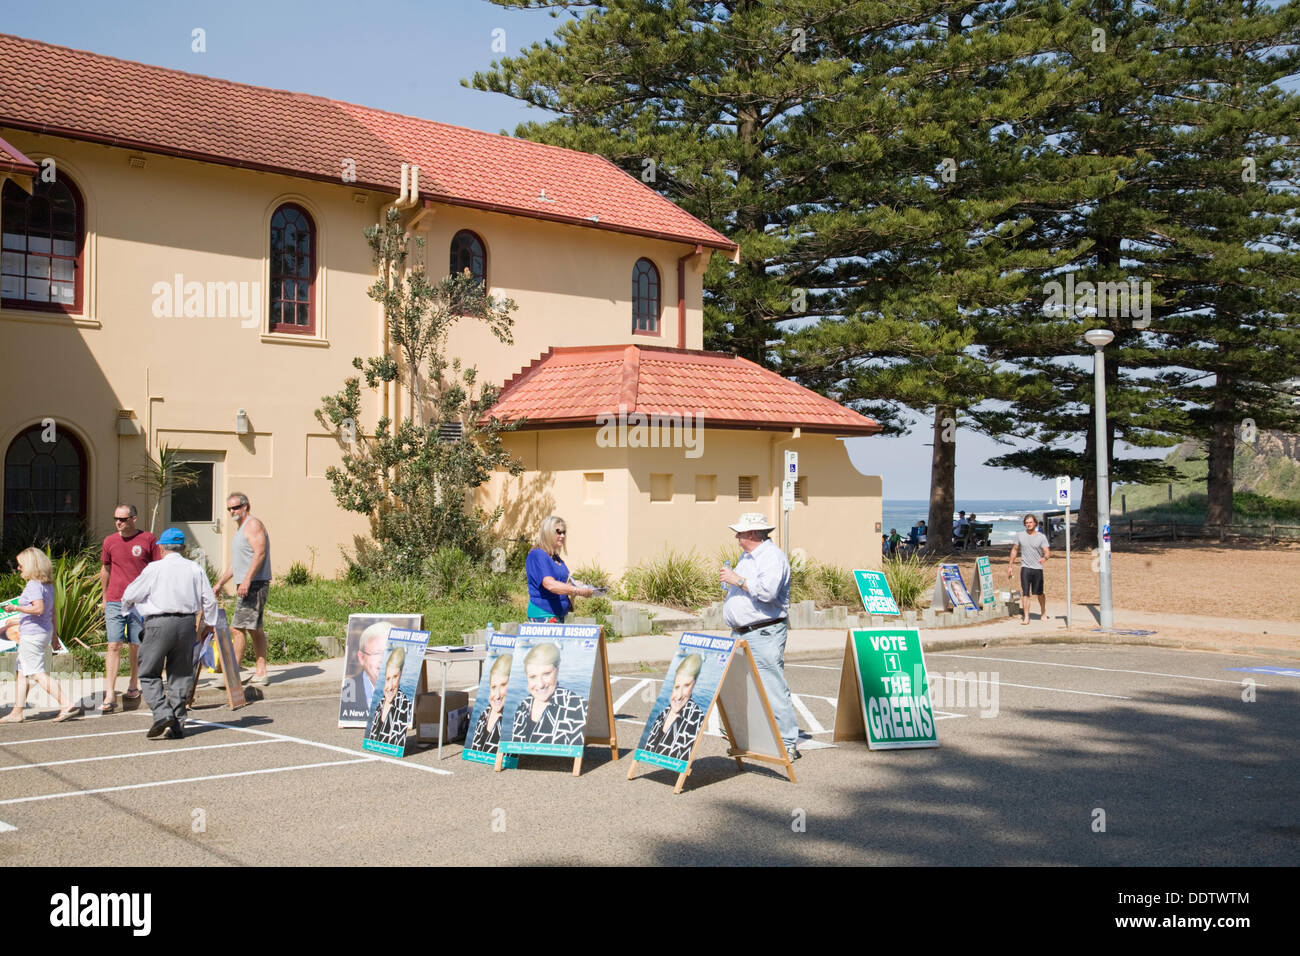 New South Wales, Australia. 7th September 2013.  Australian federal election, Australians voting on Saturday 7th september 2013 at Newport Beach surf life saving club on Sydney's northern beaches, Newport beach, New South Wales, Australia Credit:  martin berry/Alamy Live News Stock Photo